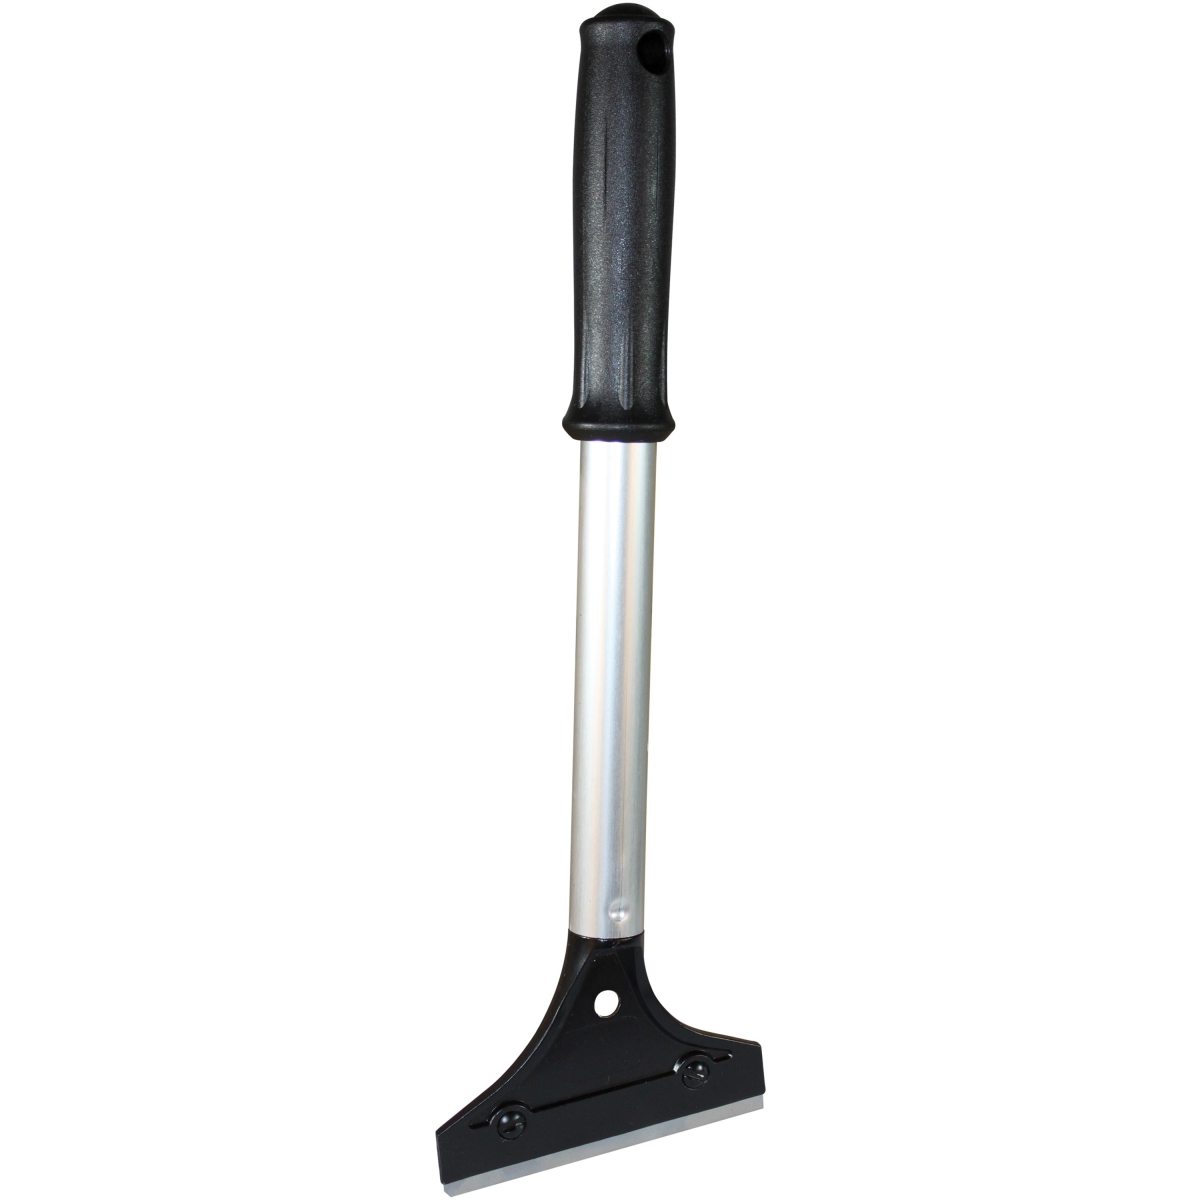 Impact Products Imp3411 12 In. Long Handled Scraper, Black & Silver